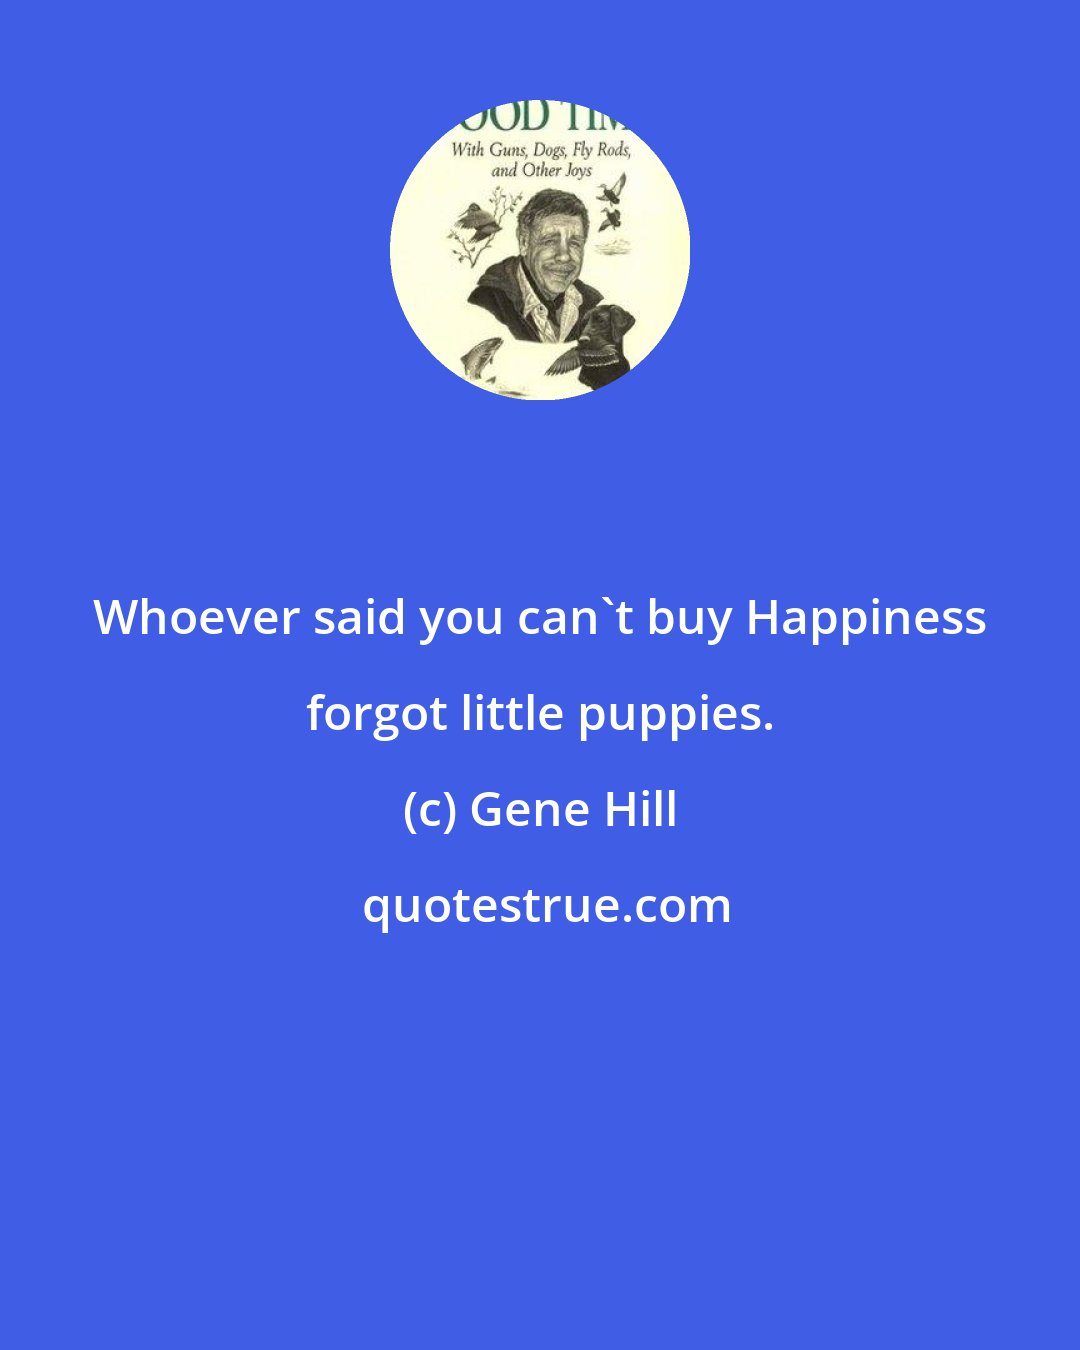 Gene Hill: Whoever said you can't buy Happiness forgot little puppies.